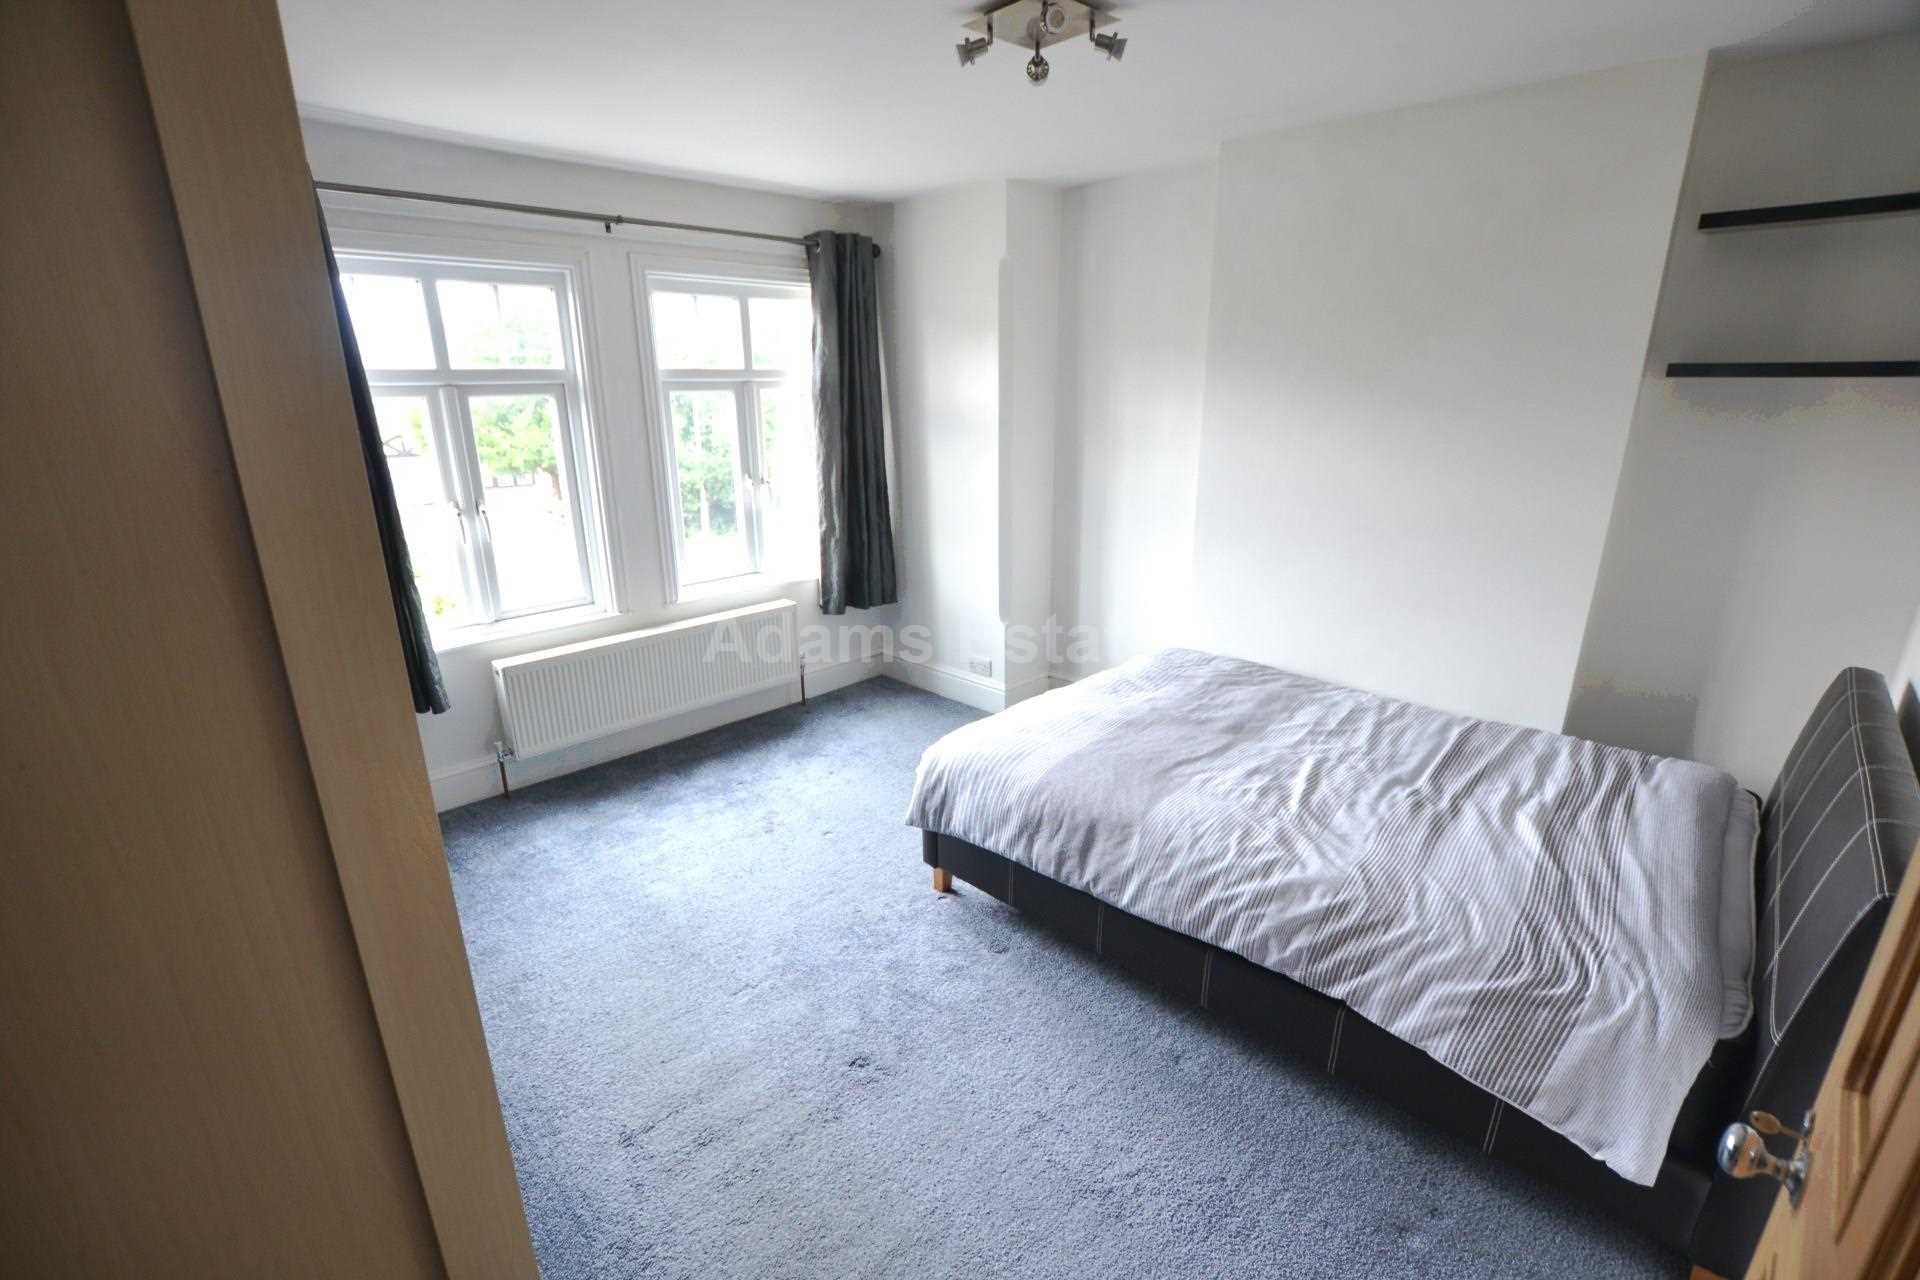 Room 3, Reading Road, Woodley, Image 8